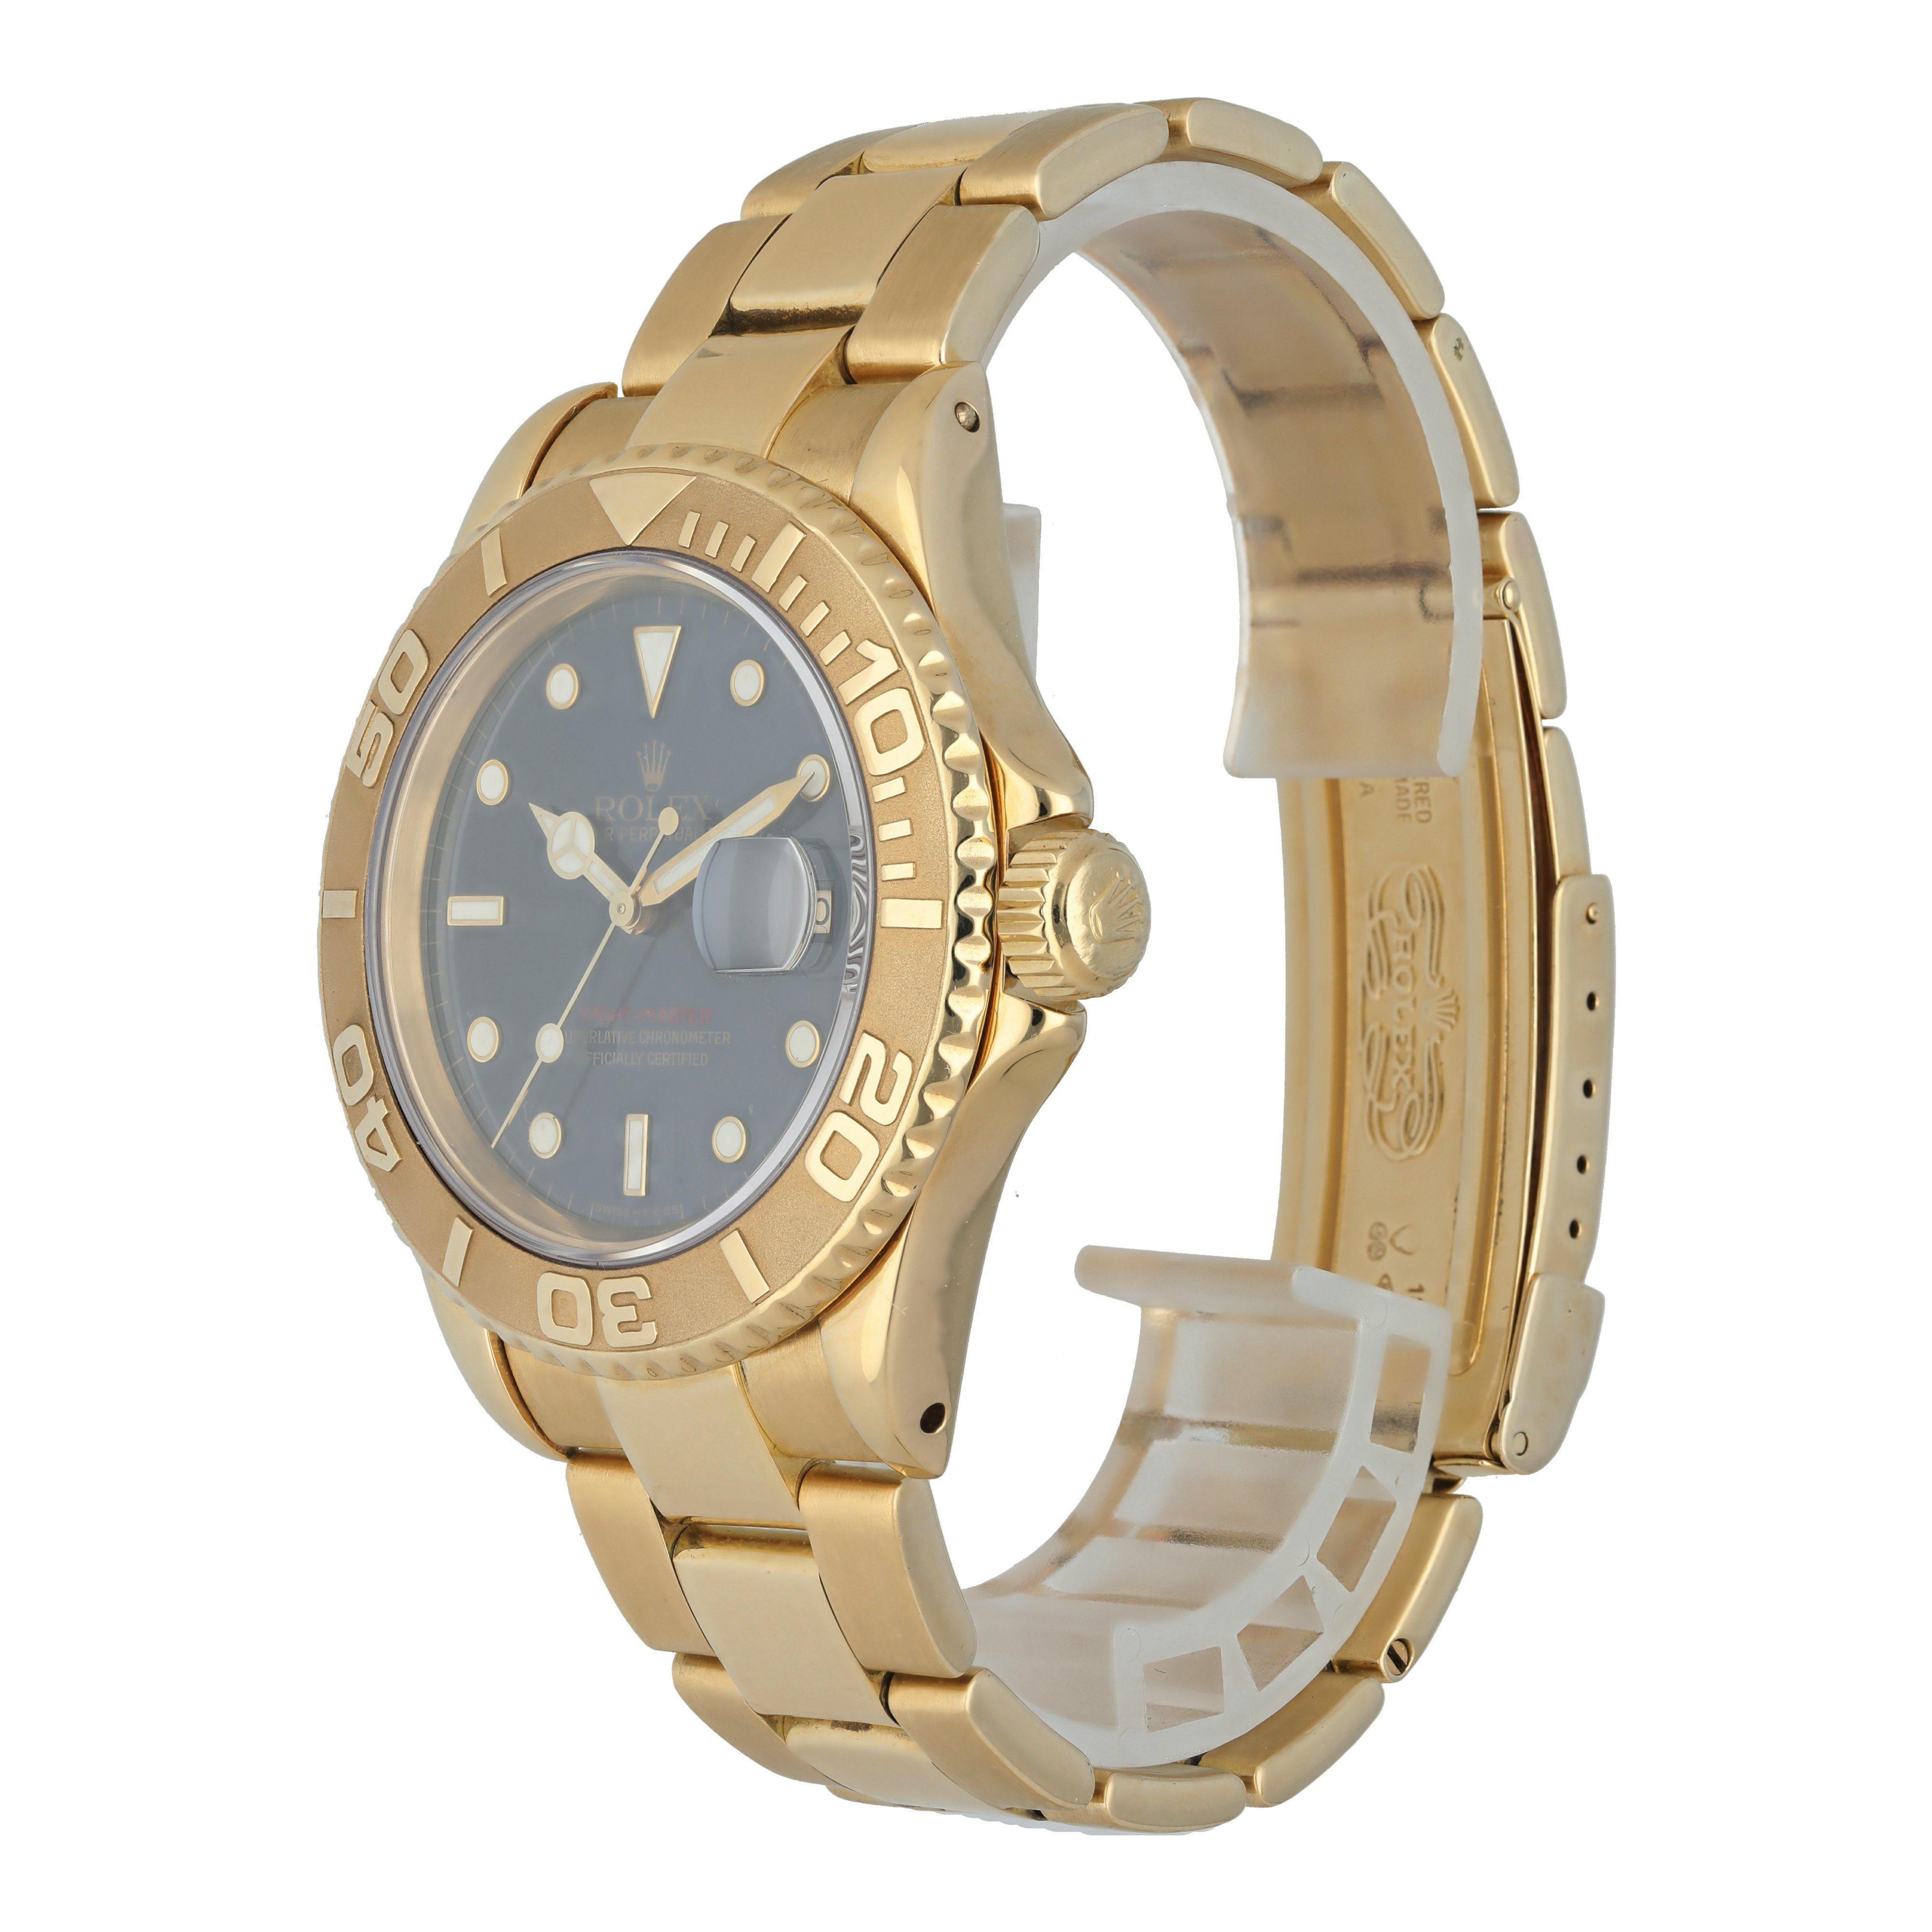 Rolex Yacht-Master 16628 Blue Dial Men's Watch.
Yellow gold 40mm case with unidirectional rotating bezel.
Blue dial with gold hands and dot hour markers.
Date display at the 3 o'clock position.
Minute markers around the outer dial.
Yellow gold